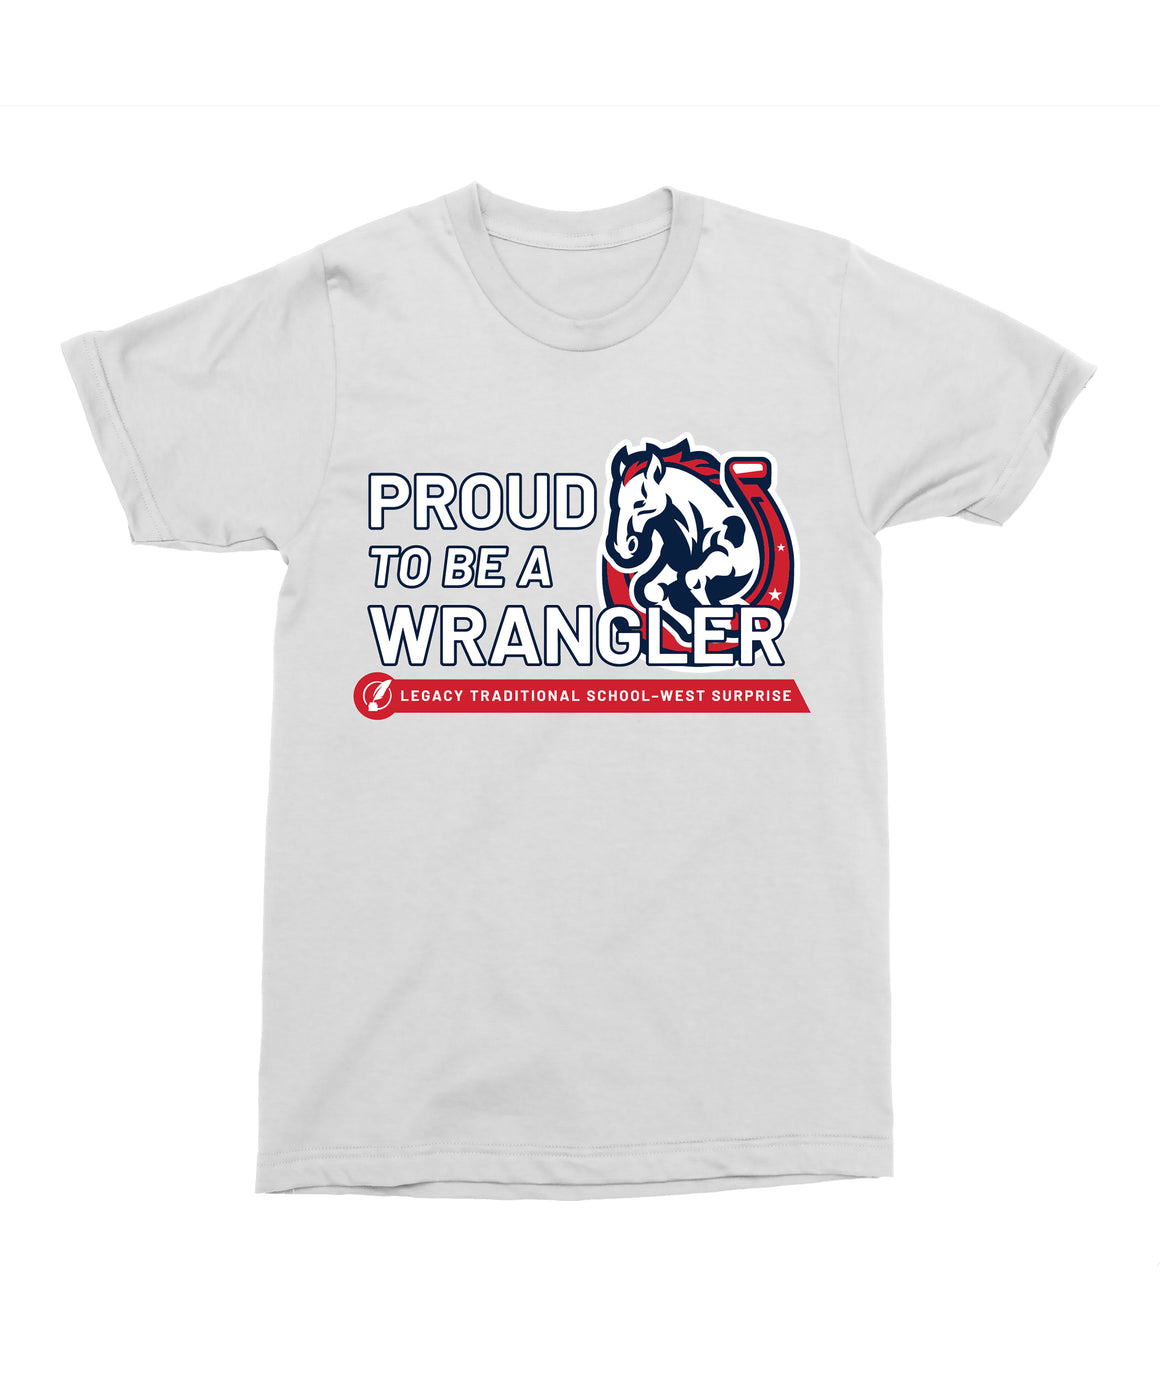 Legacy Traditional School West Surprise - Mascot Pride White Spirit Day Shirt